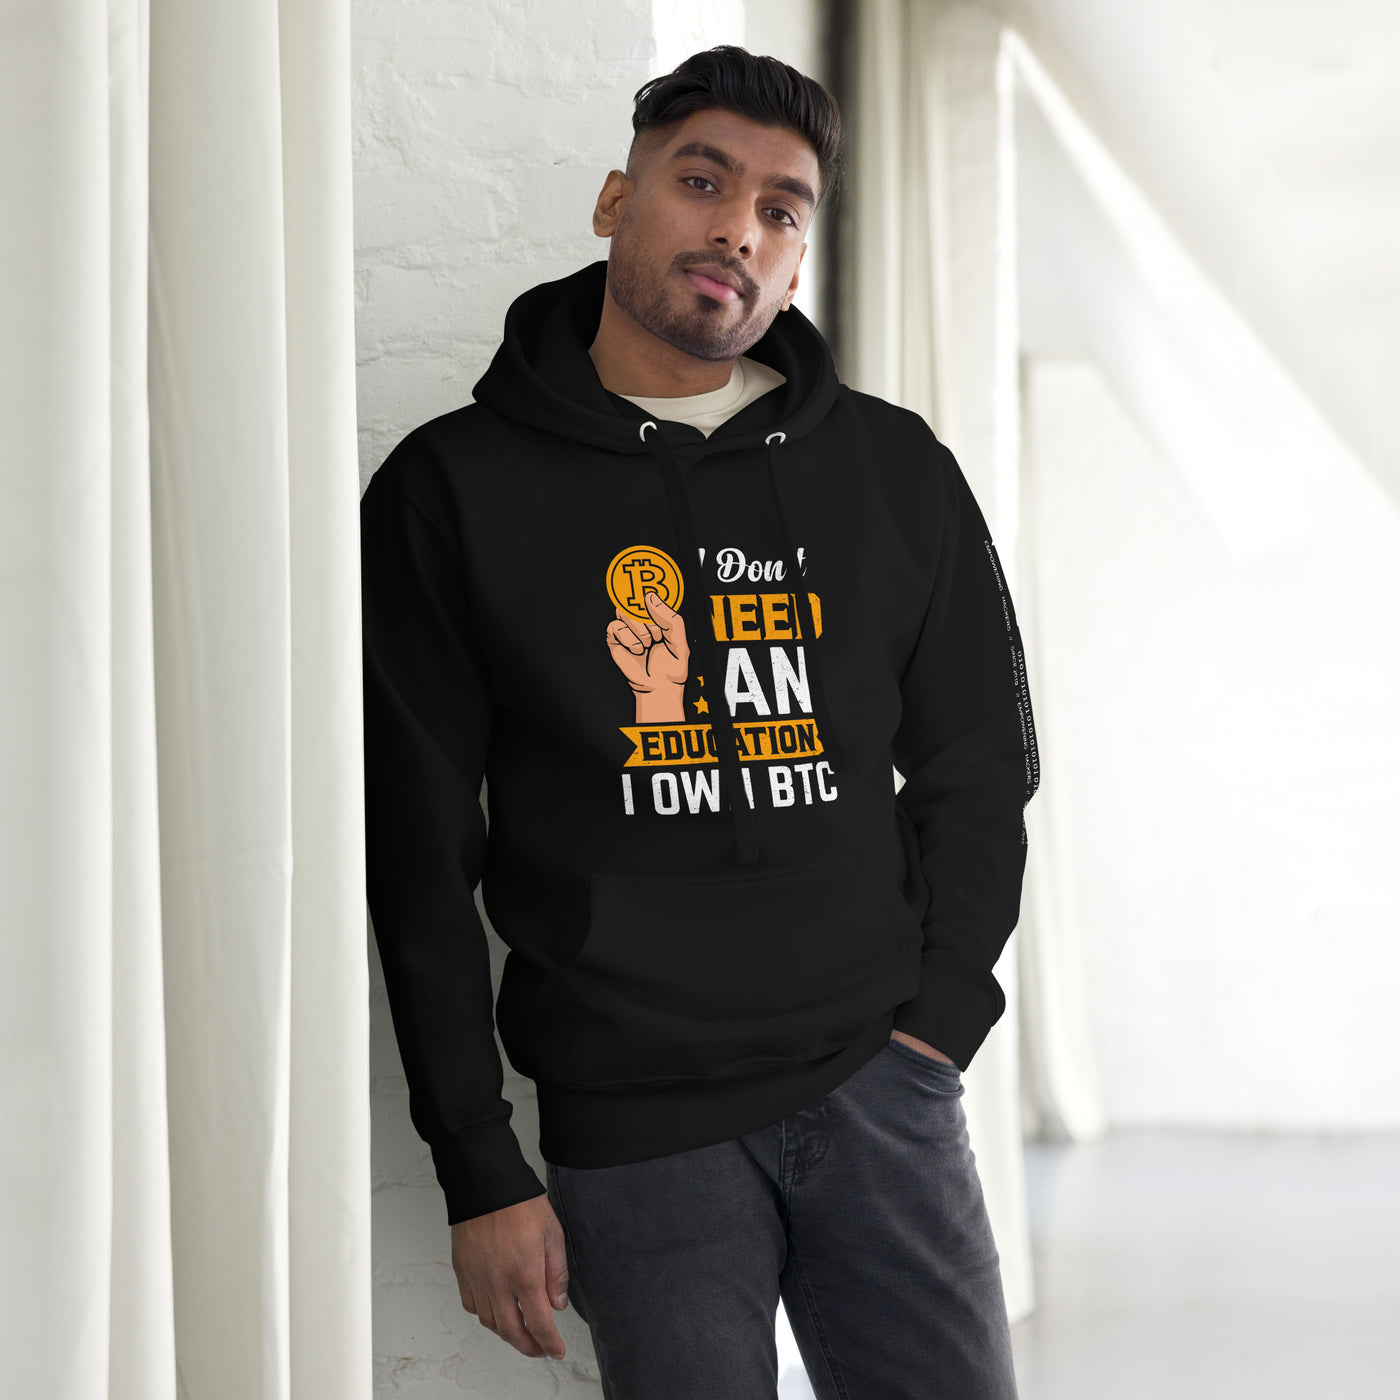 I don't need an Education, I own Bitcoin Unisex Hoodie